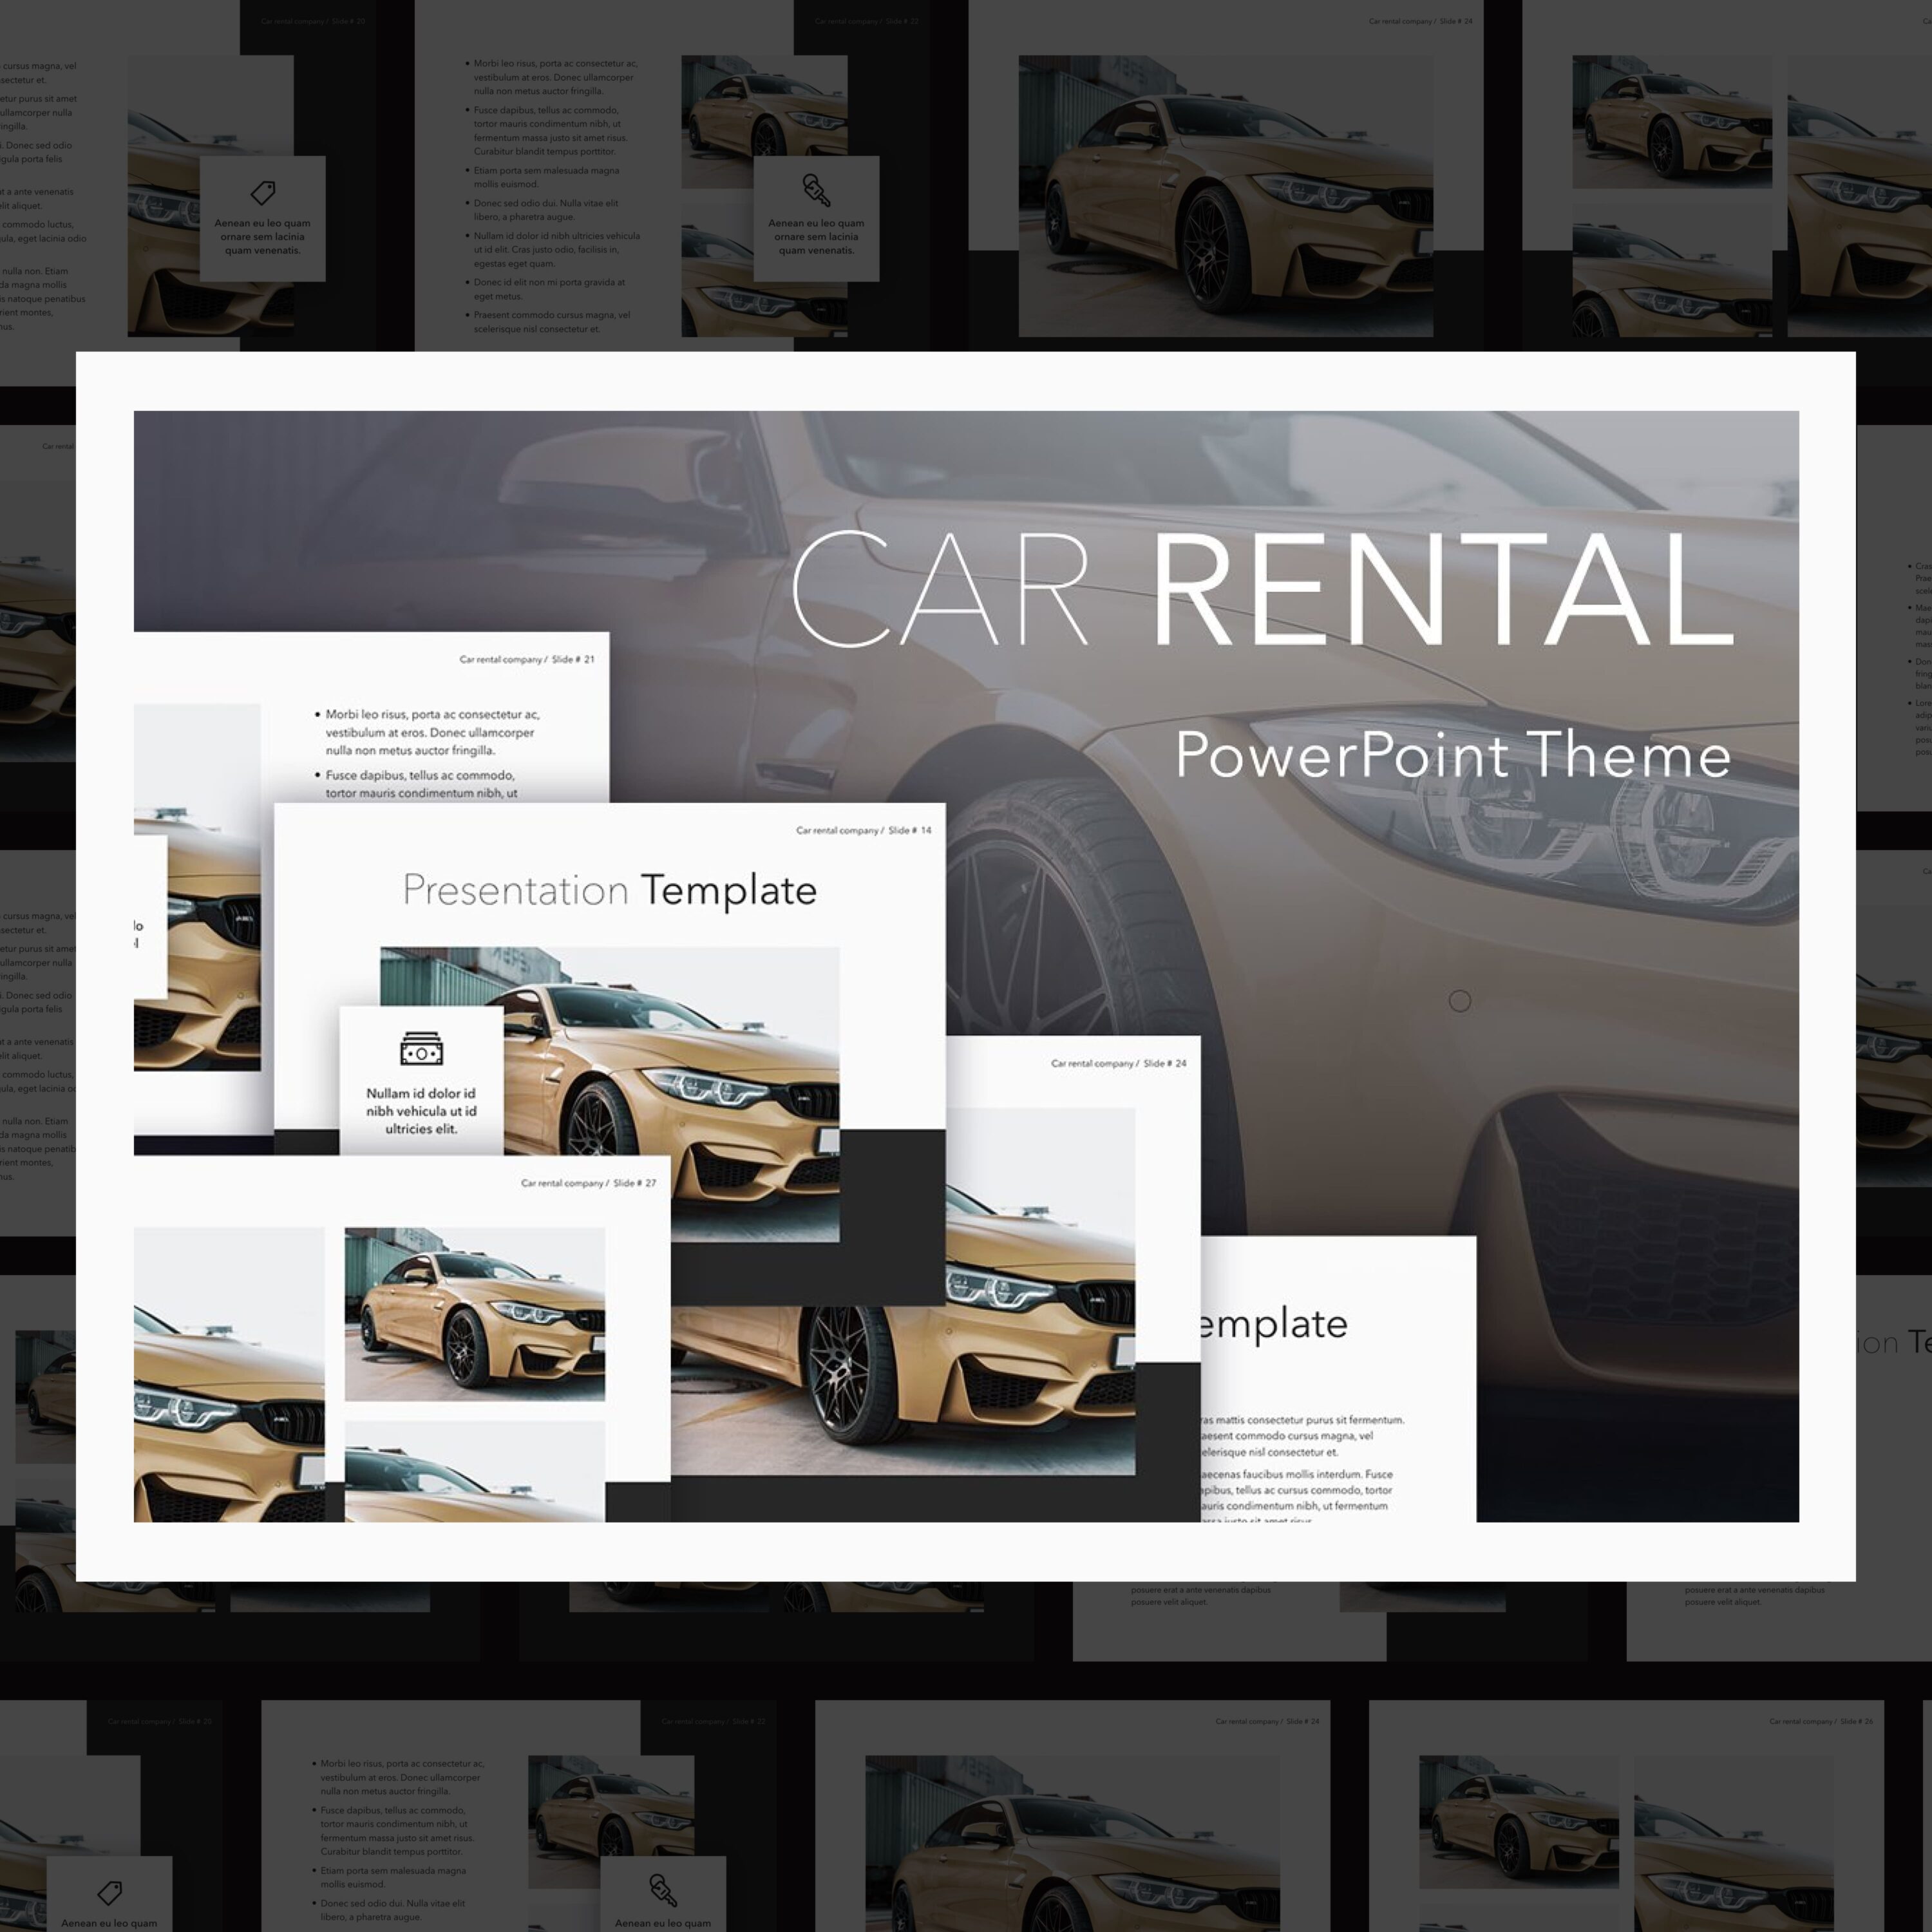 Car Rental PowerPoint Theme cover.